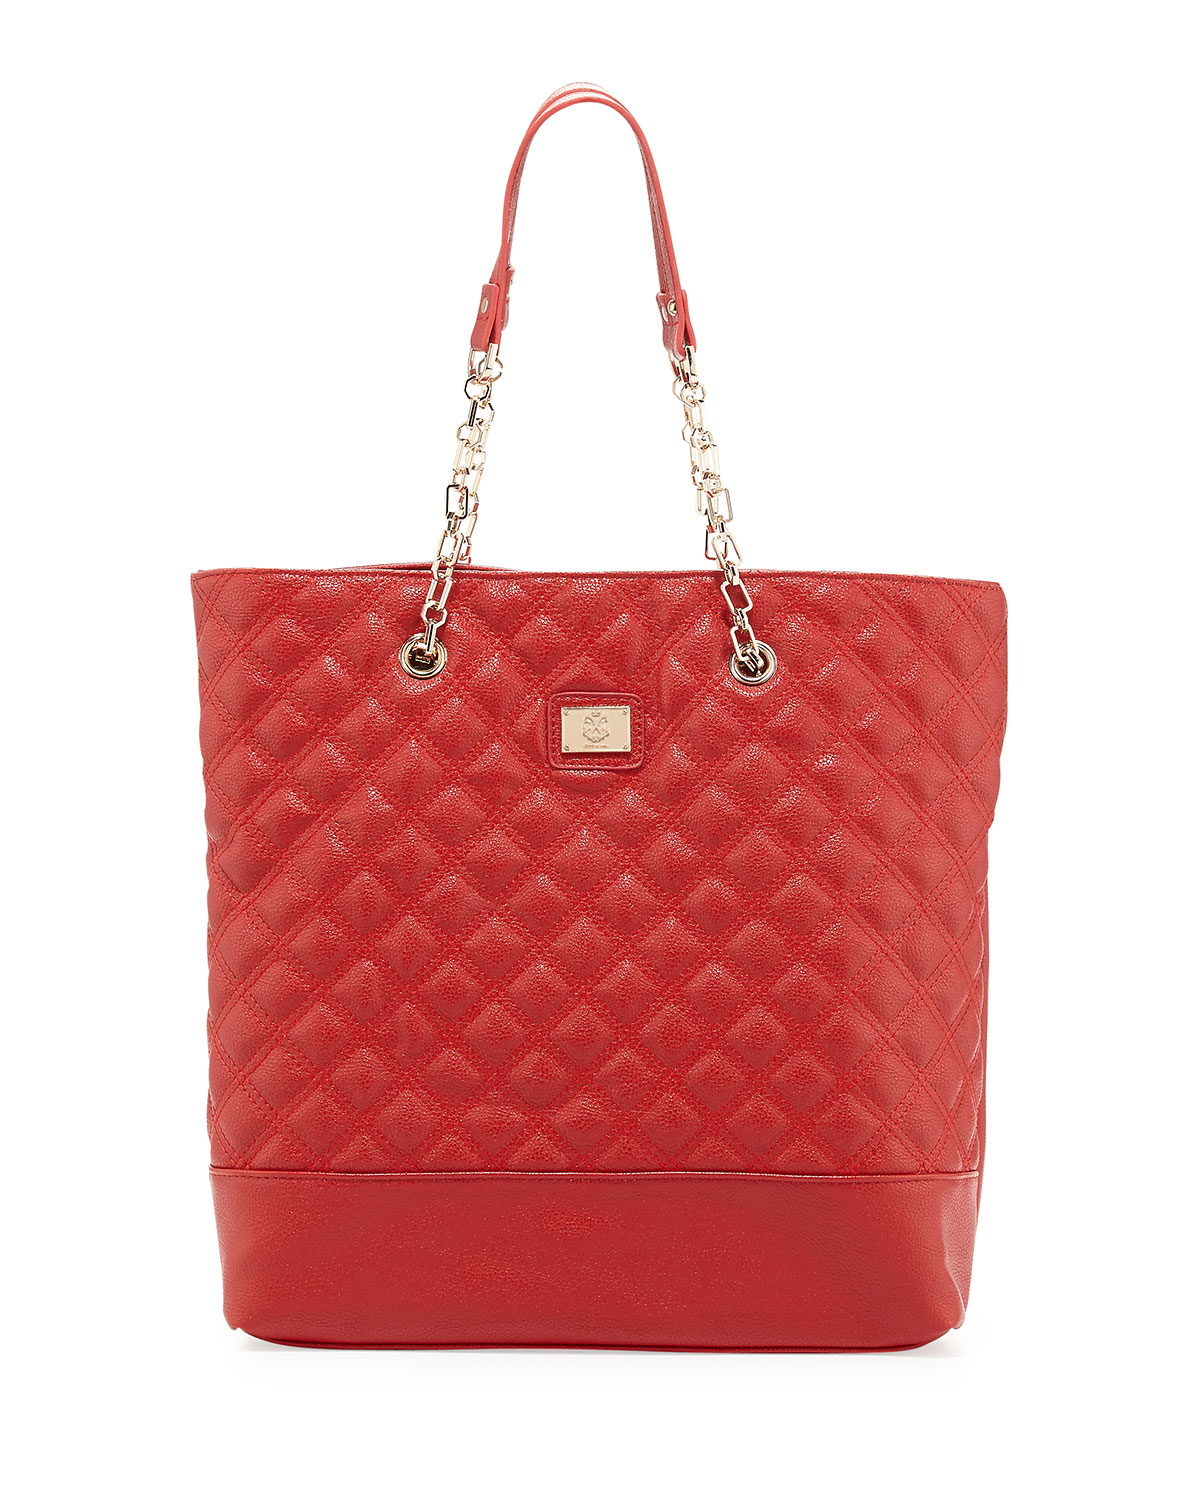 Lyst - Christian Lacroix Lucile Quilted Faux Leather Tote Bag Red in Red